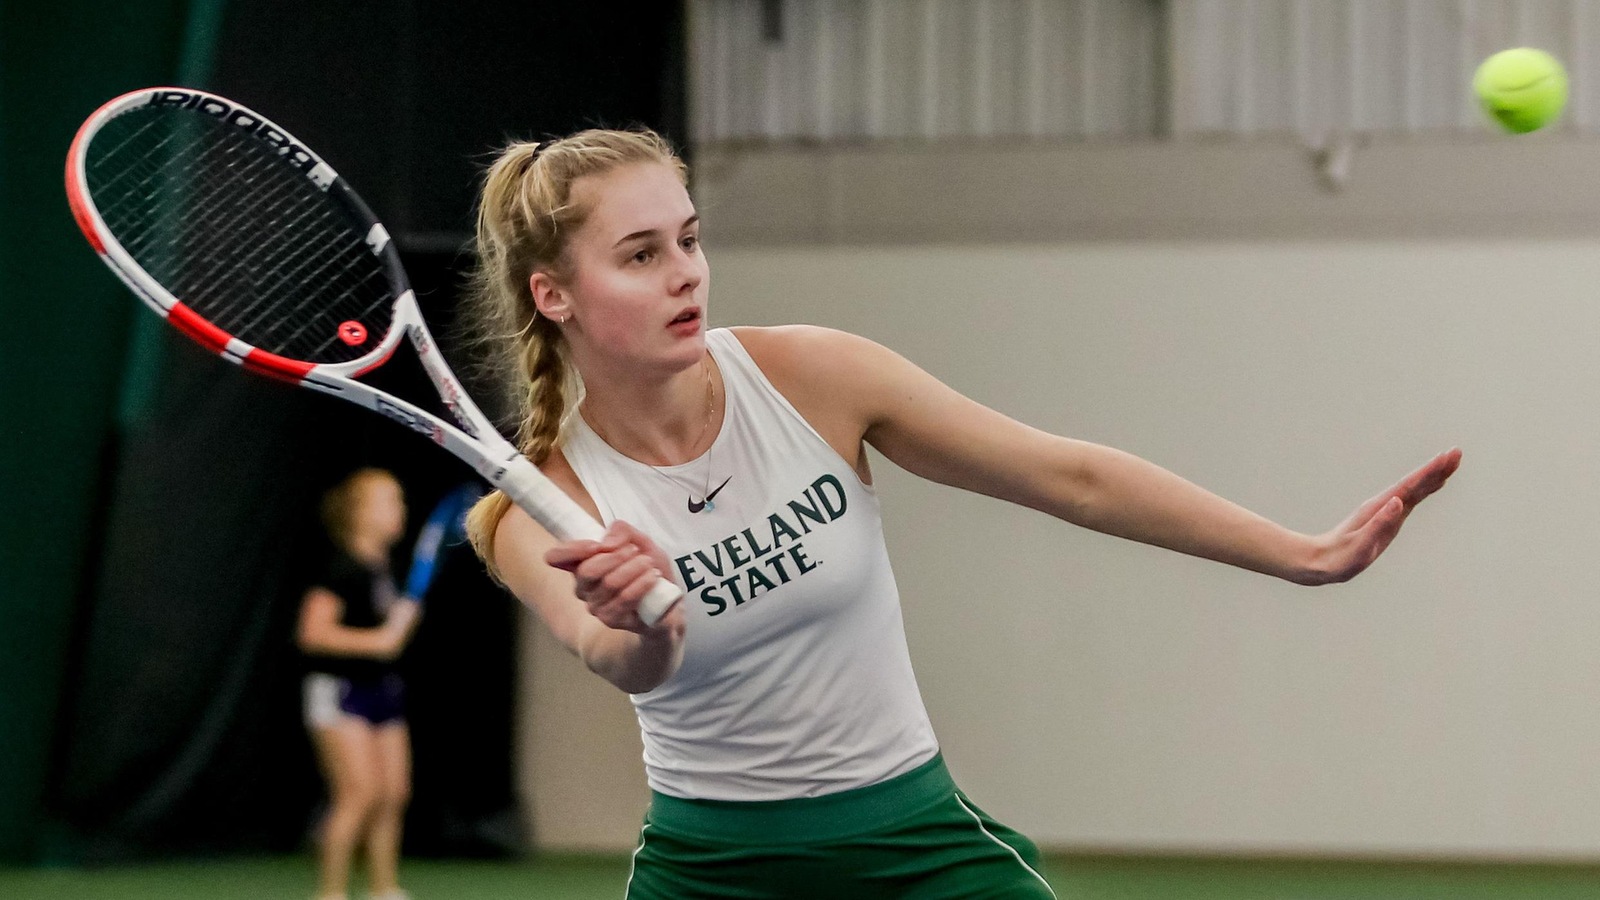 Cleveland State Women’s Tennis Adjusts Buffalo/Bowling Green Schedule For This Weekend